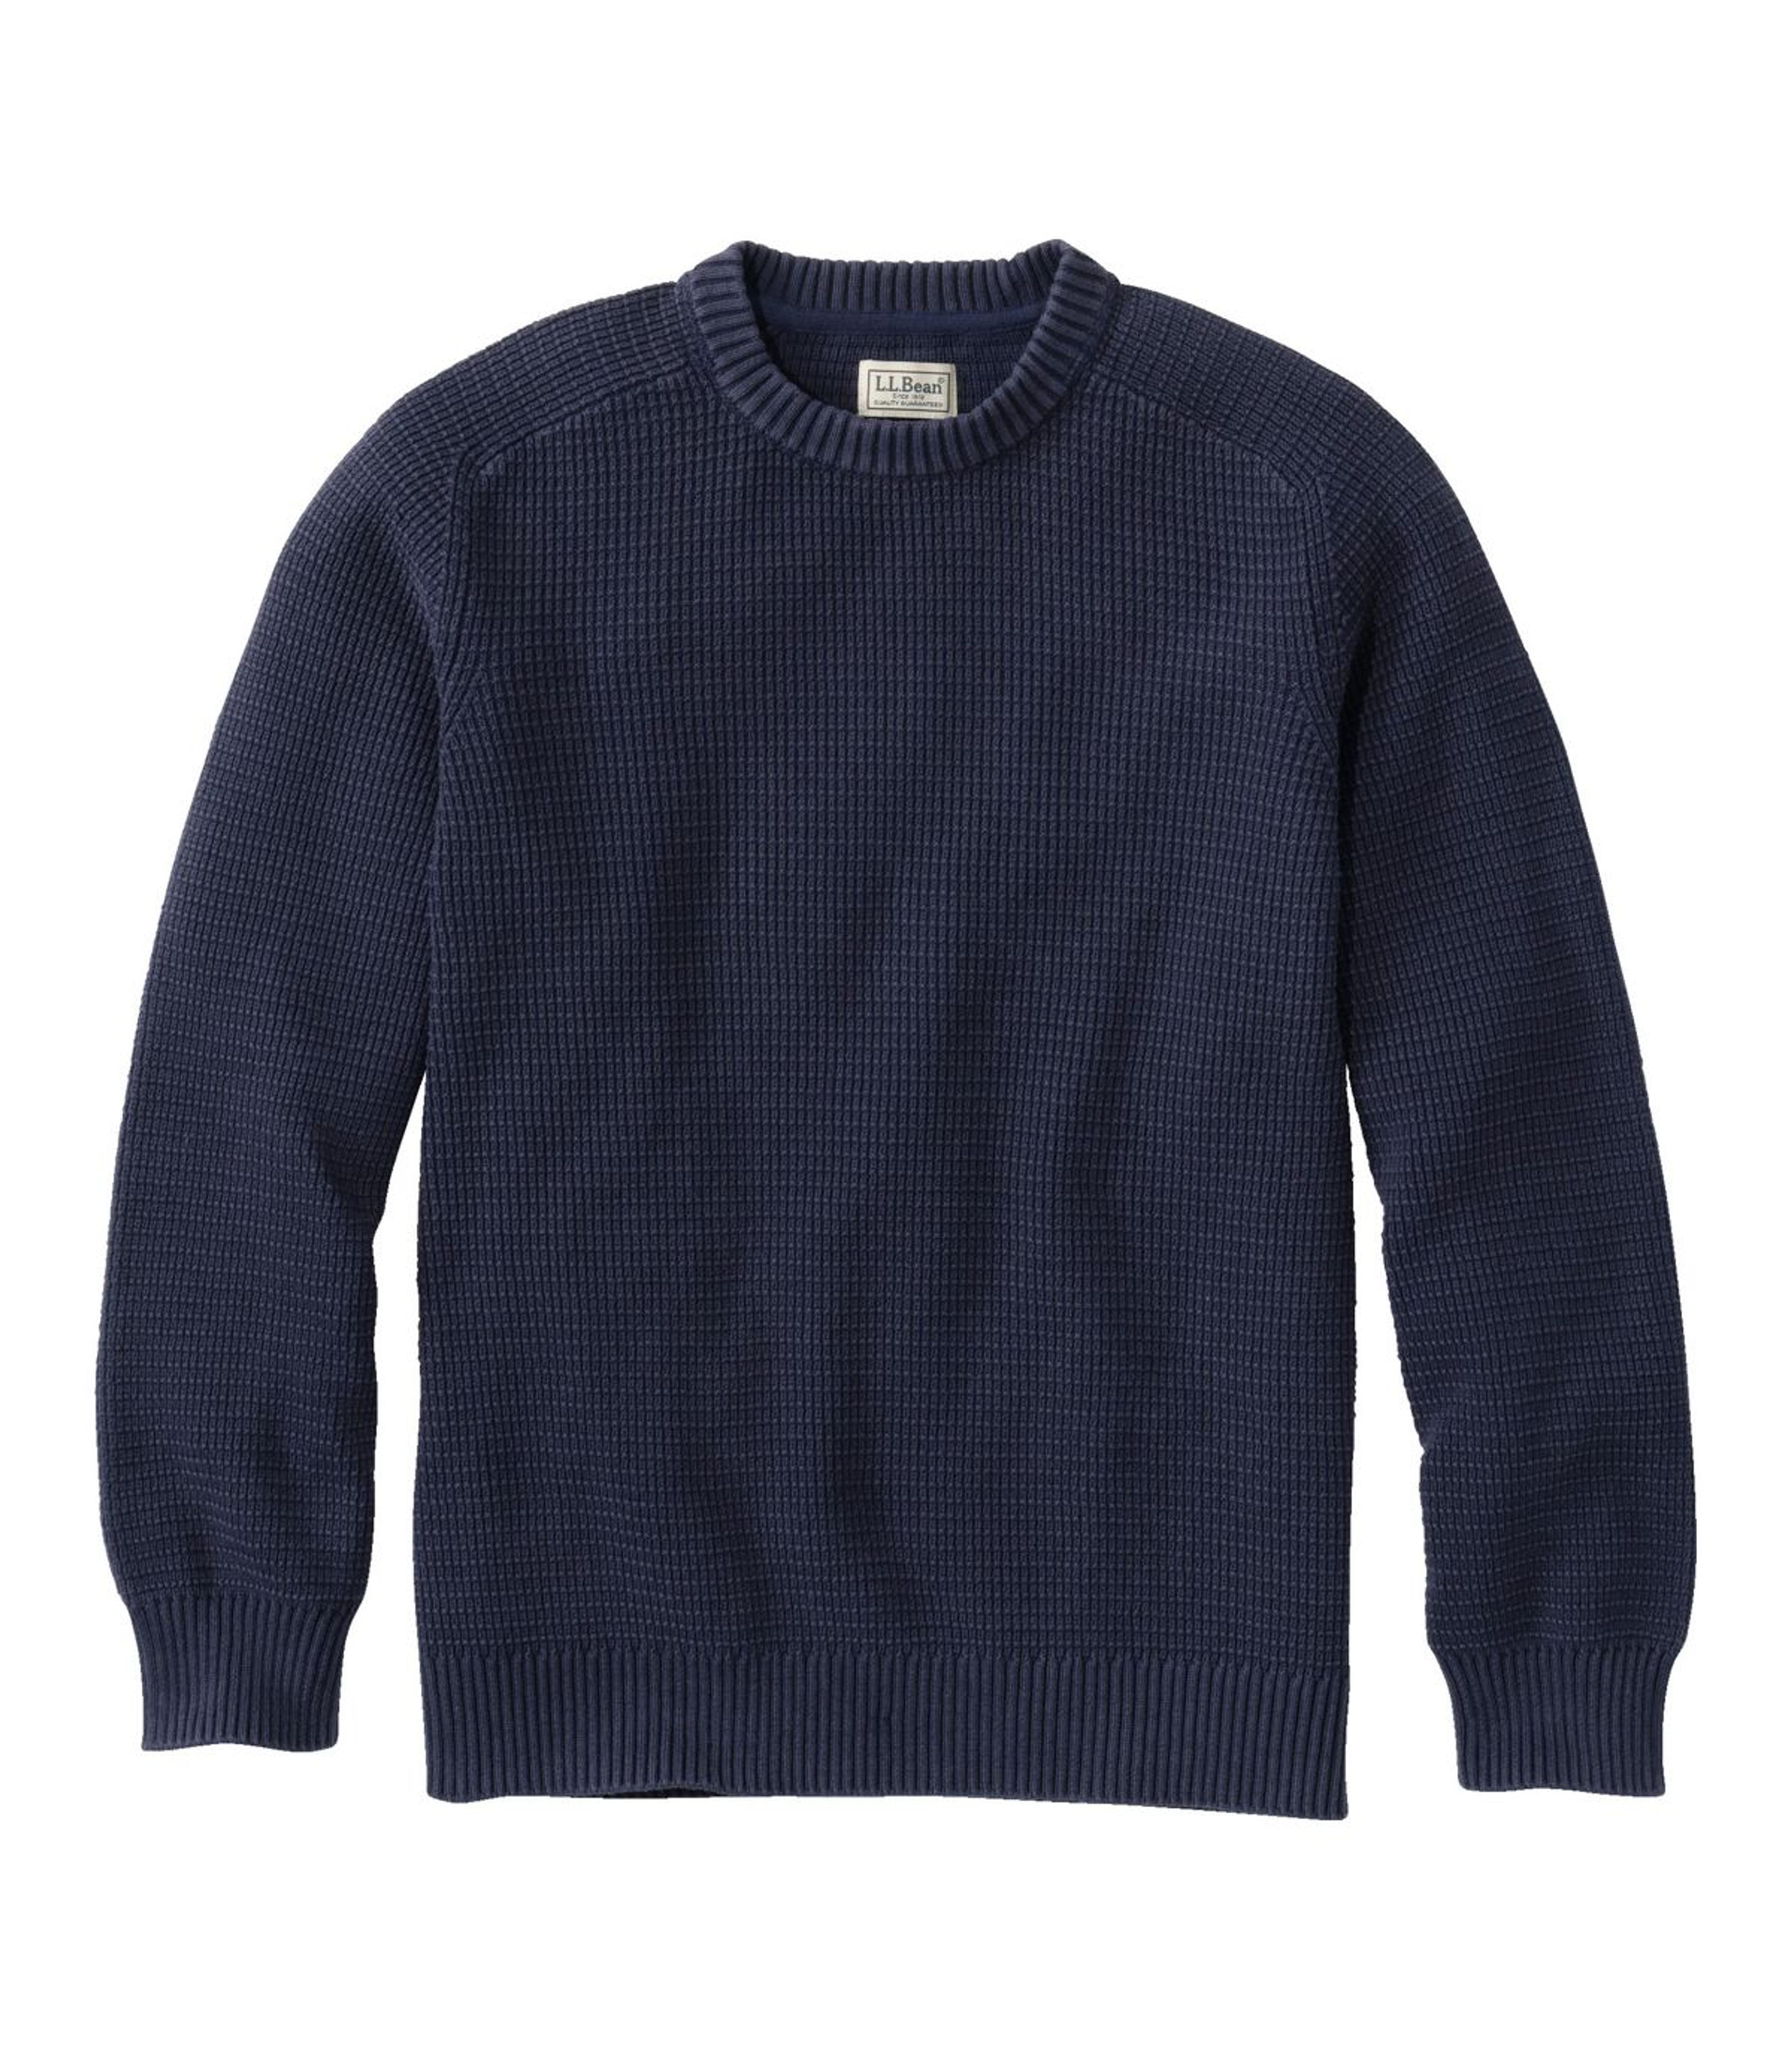 Men's Textured Washed Cotton Sweaters, Crewneck | Sweaters at L.L.Bean